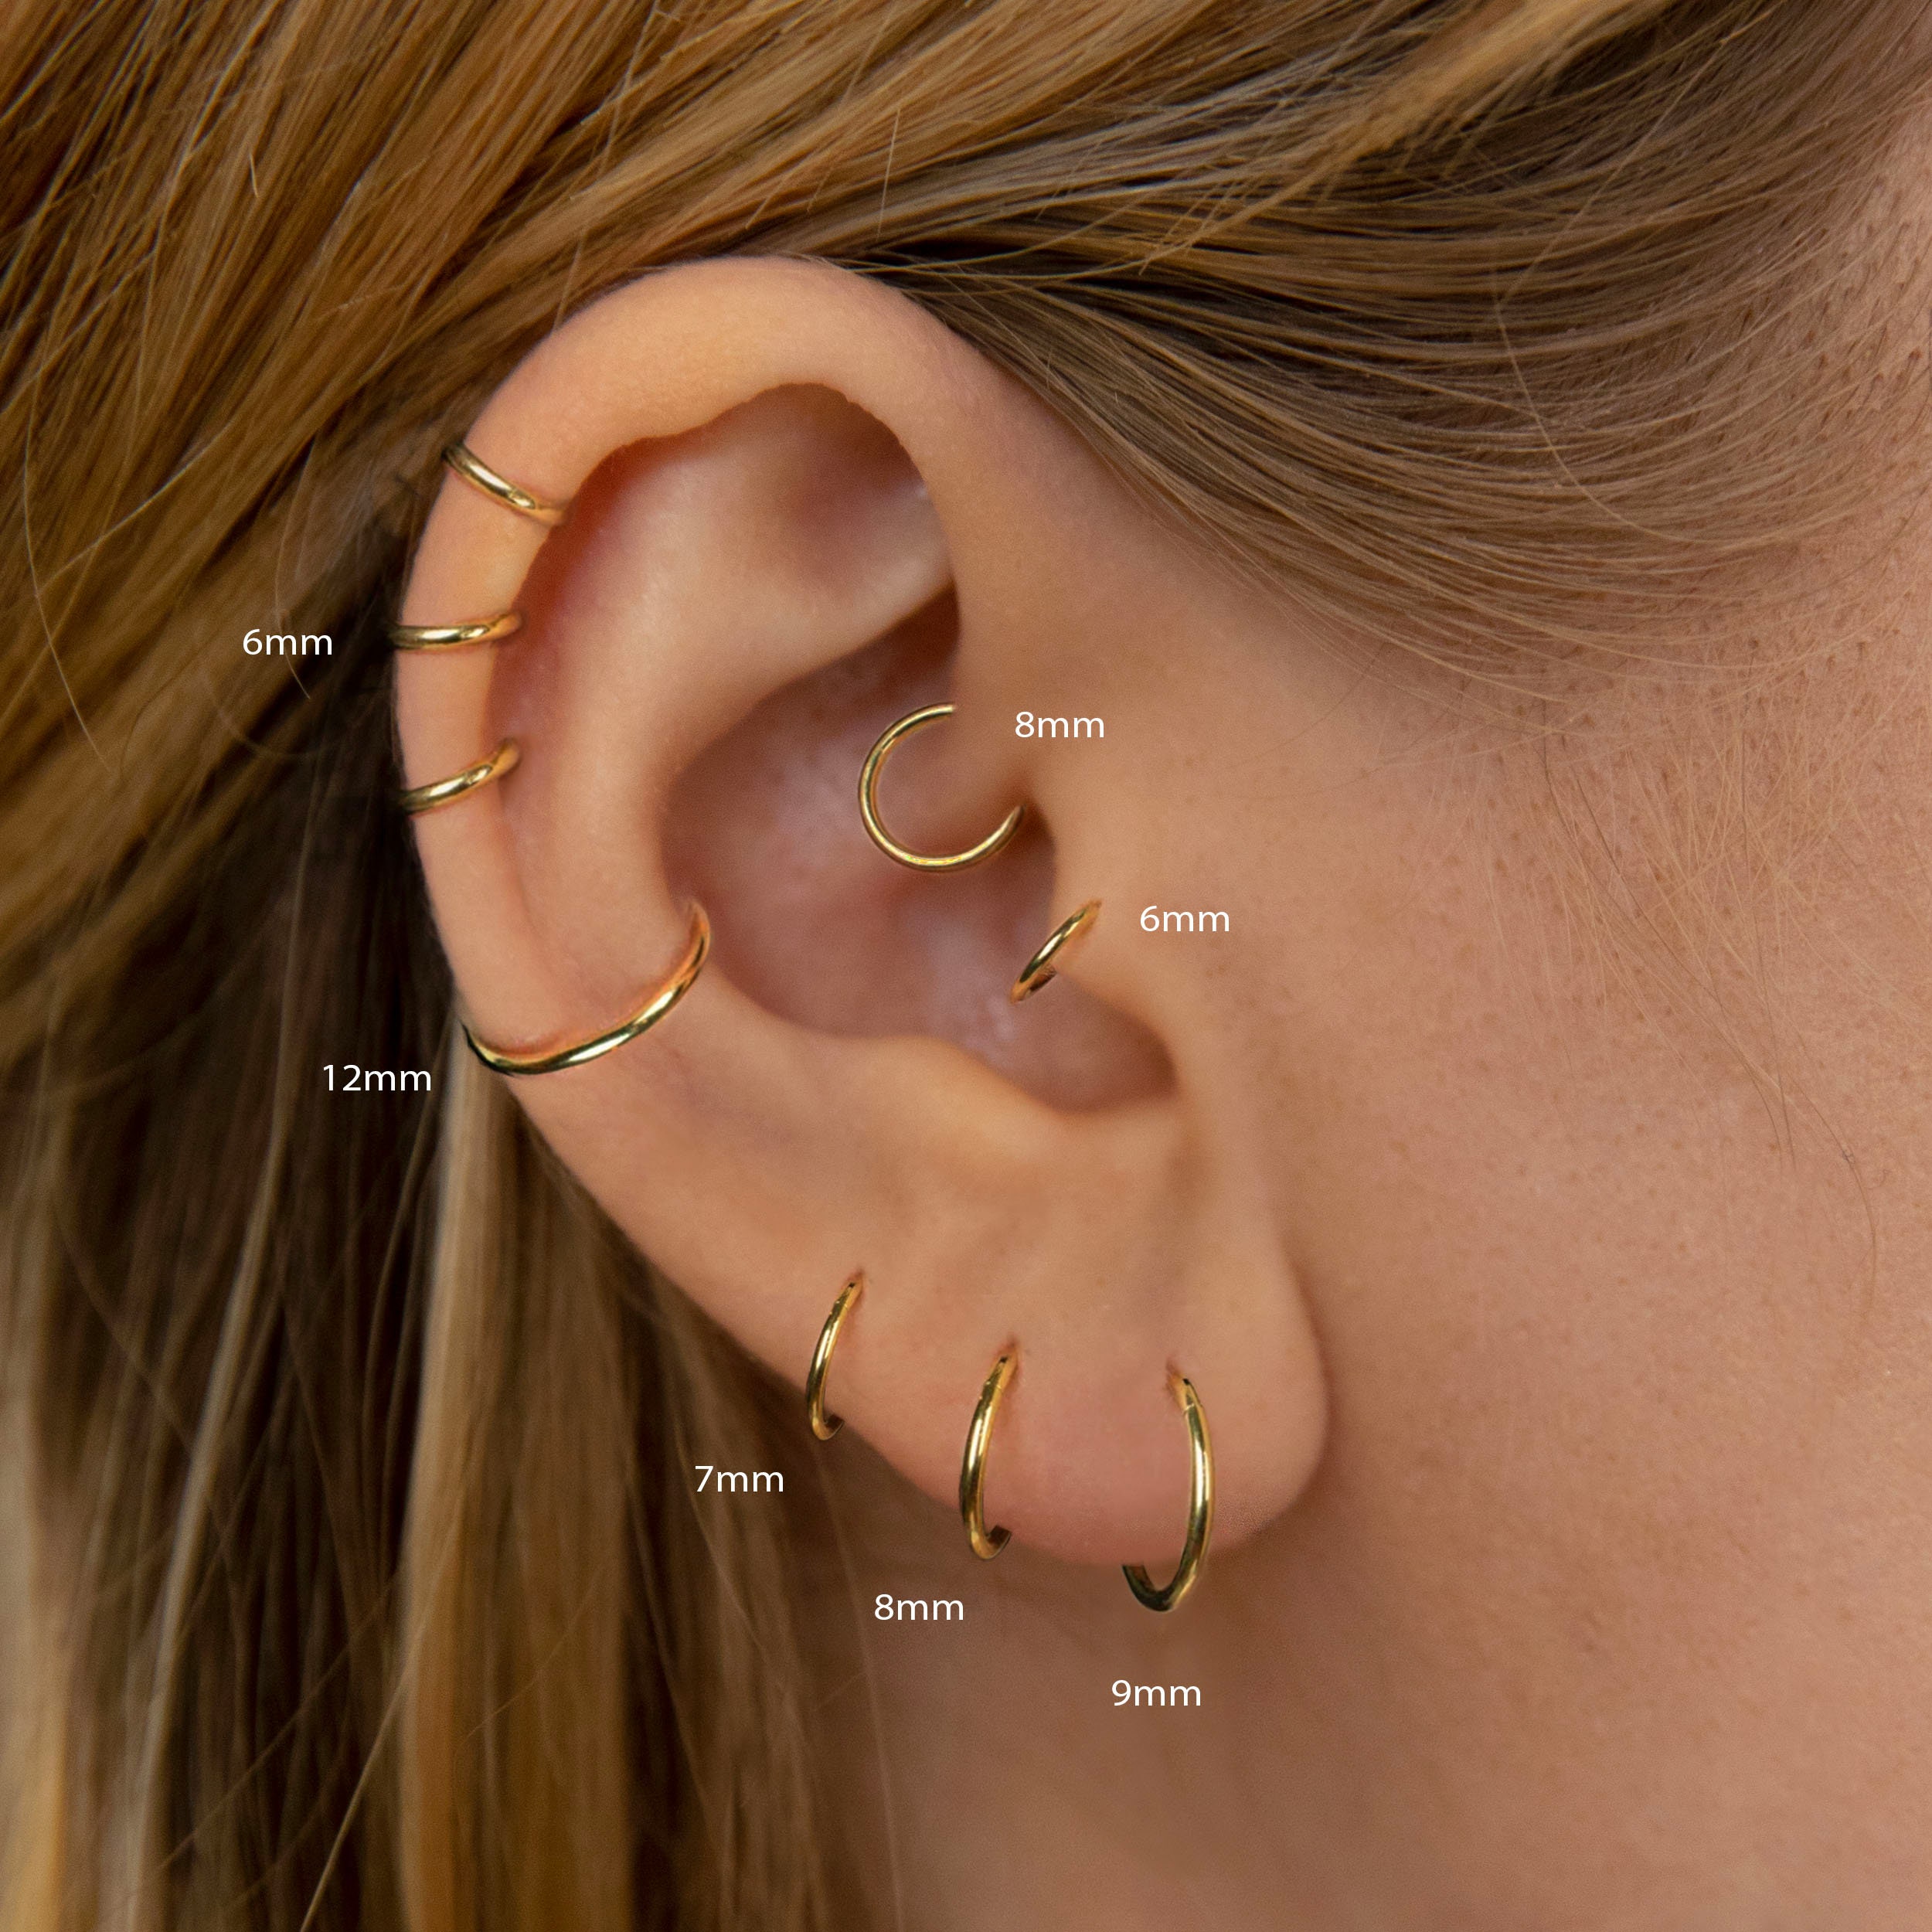 Cartilage Piercing Inspiration: High Helix, Helix, Daith, Tragus, Stacked  Lobe and Lobes | Earings piercings, Piercing stud earrings, Pretty ear  piercings